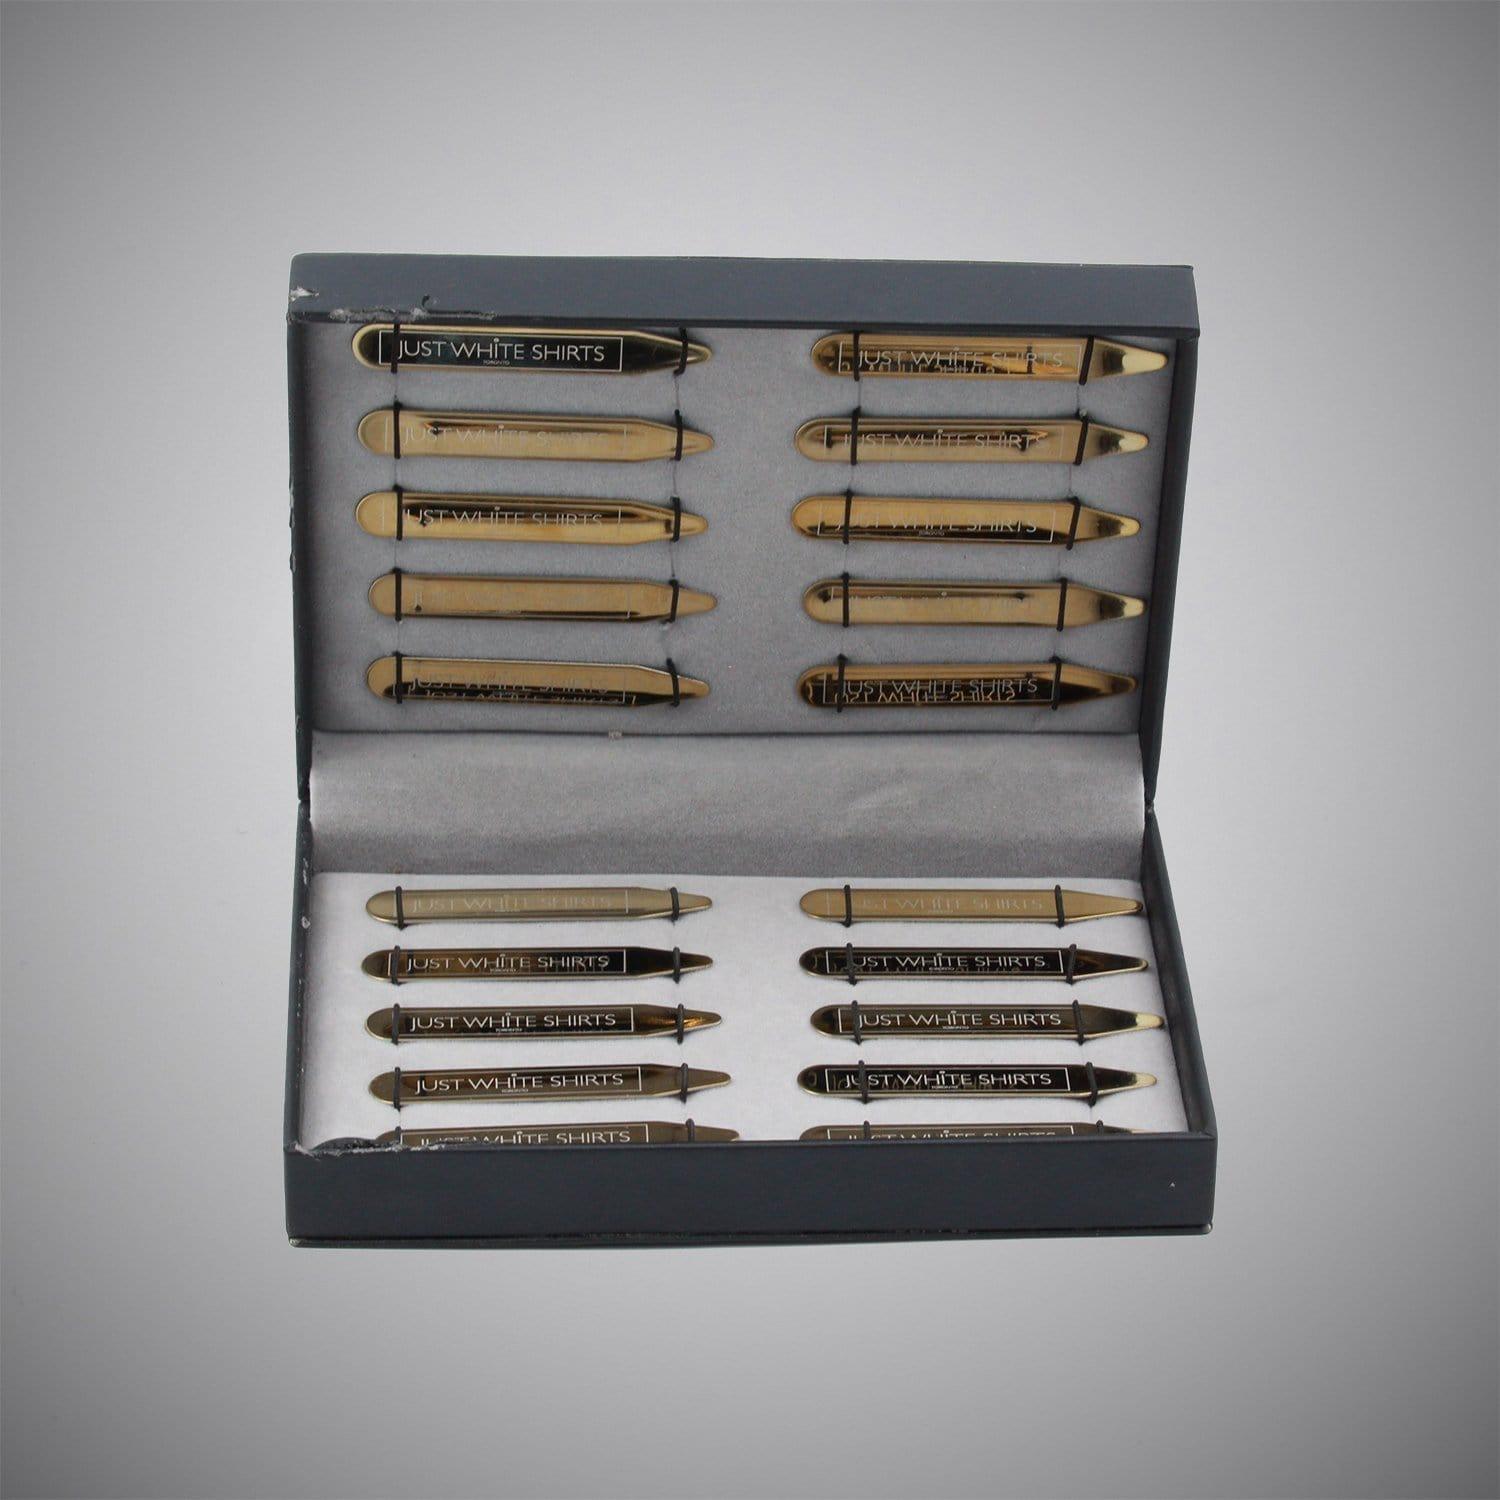 Gold Chrome Finish Stainless Steel 20 Piece Collar Stay Box Set - Just White Shirts